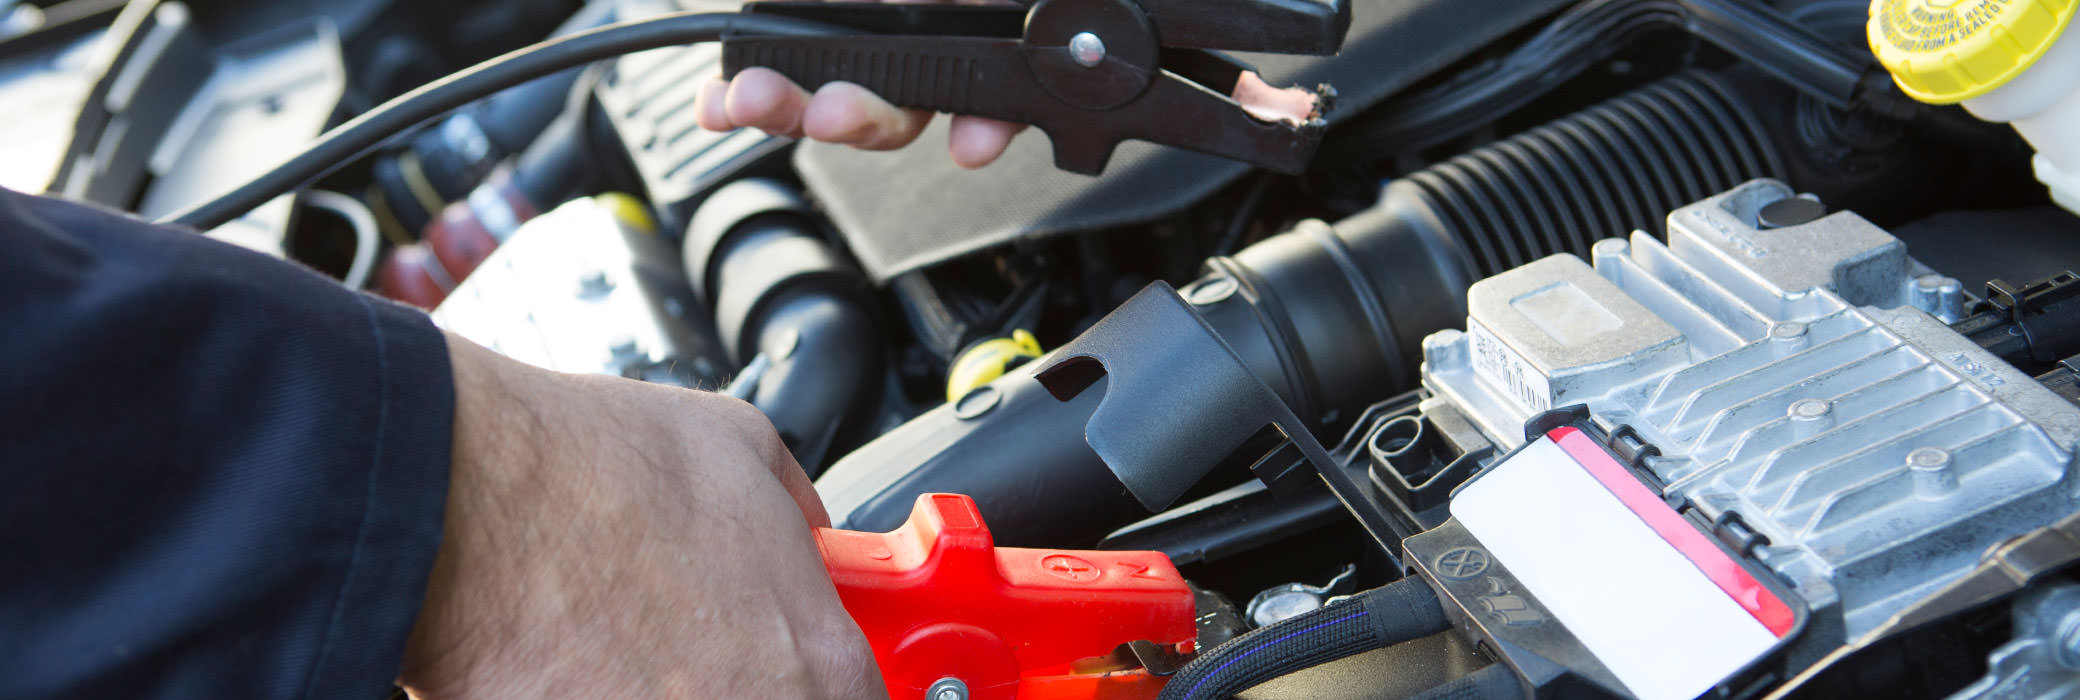 How to Jump-start a dead battery in nine simple steps.